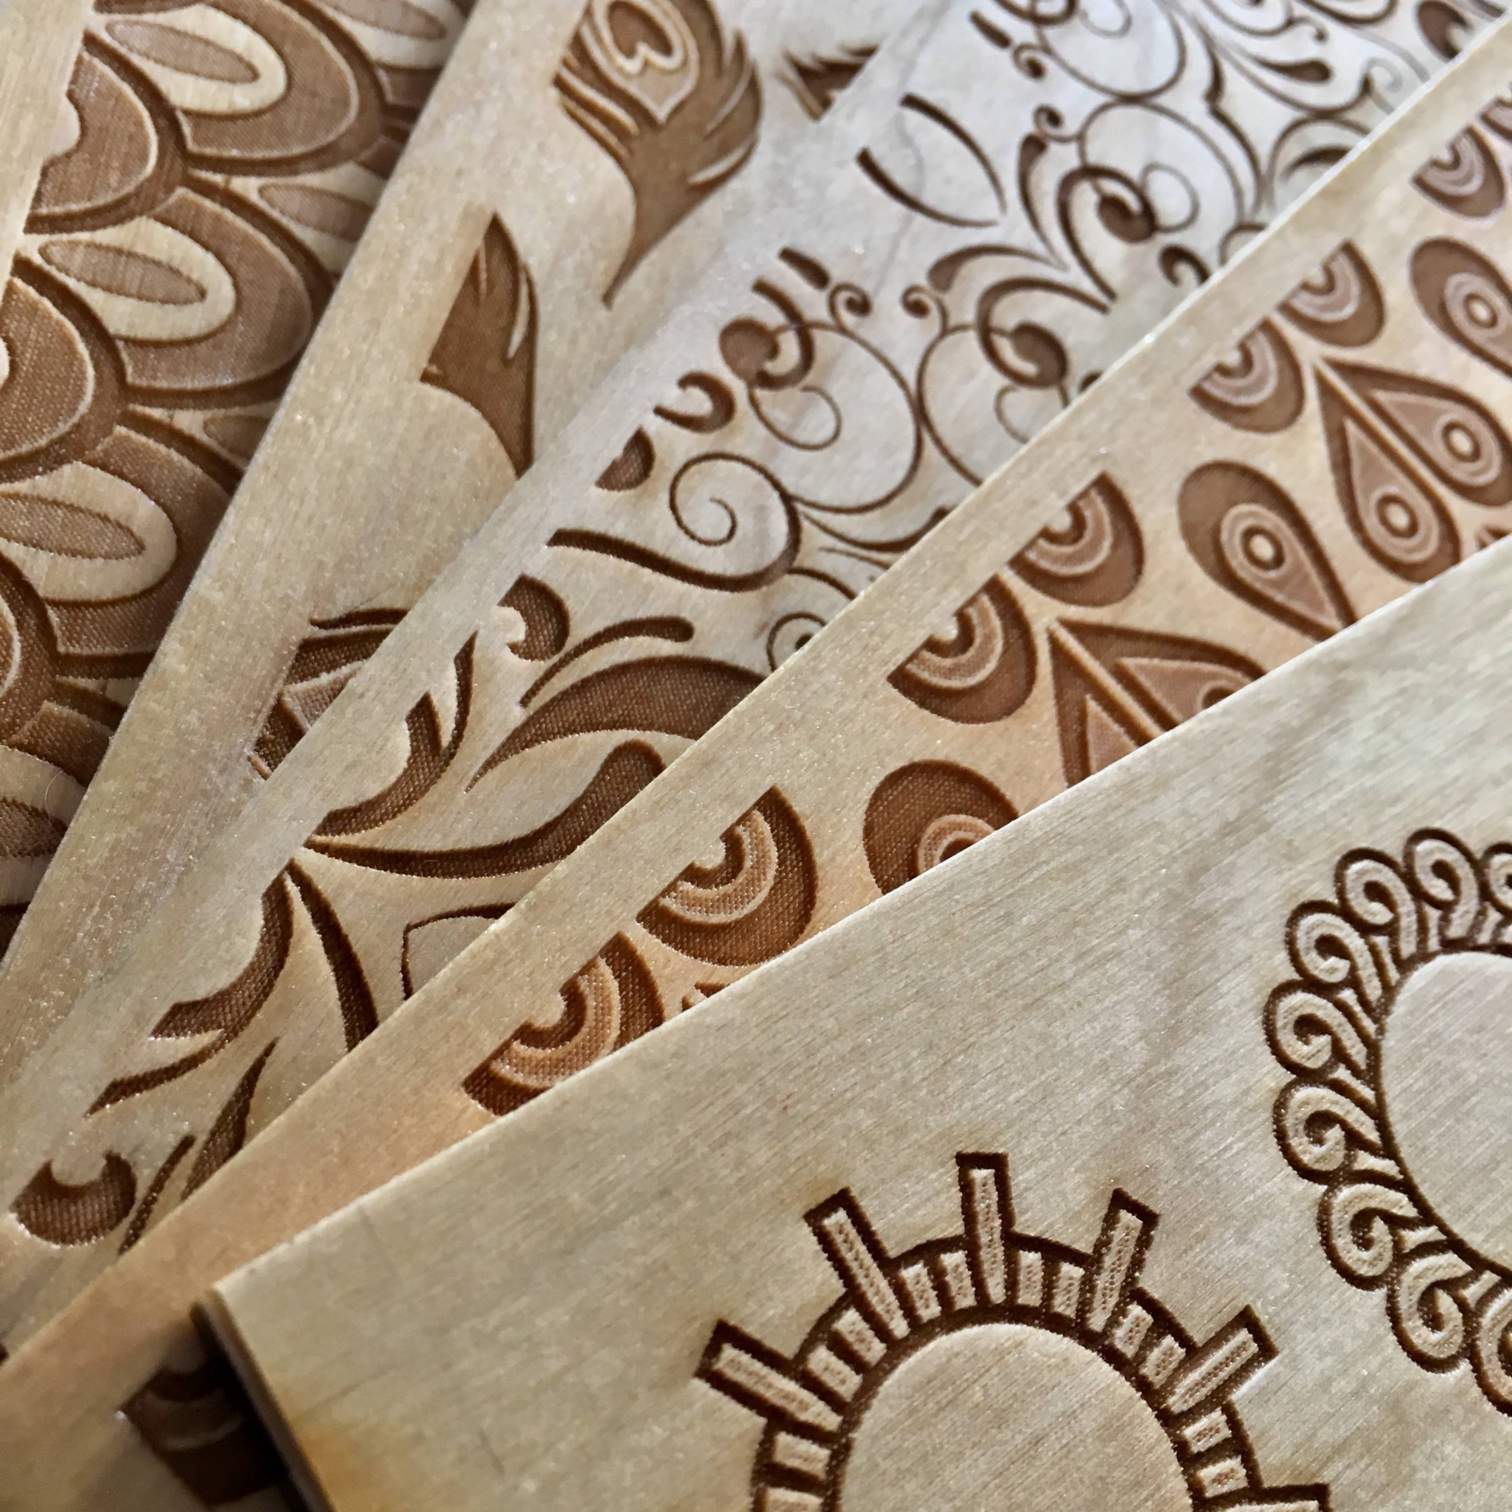 Close up of designs laser engraved on pieces of wood